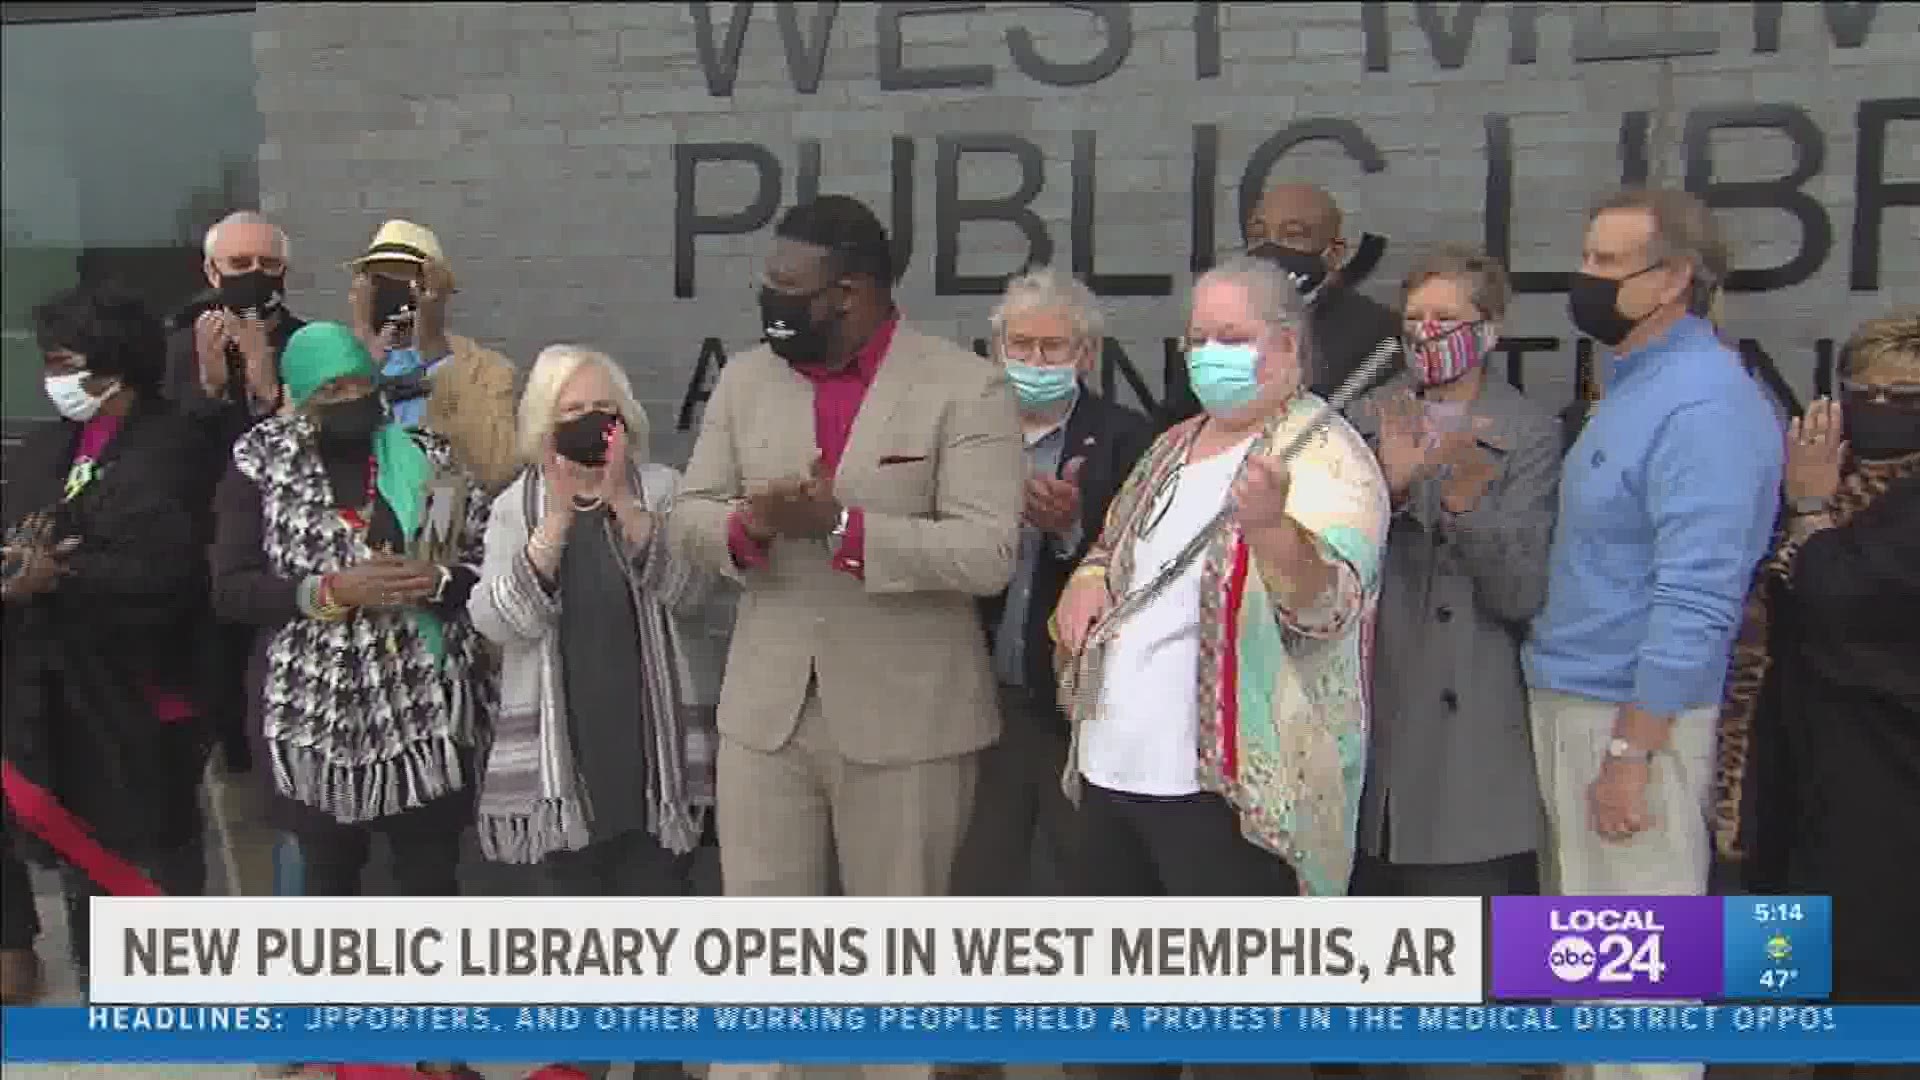 "West Memphis is moving forward in the right direction,” said Mayor Marco McClendon.